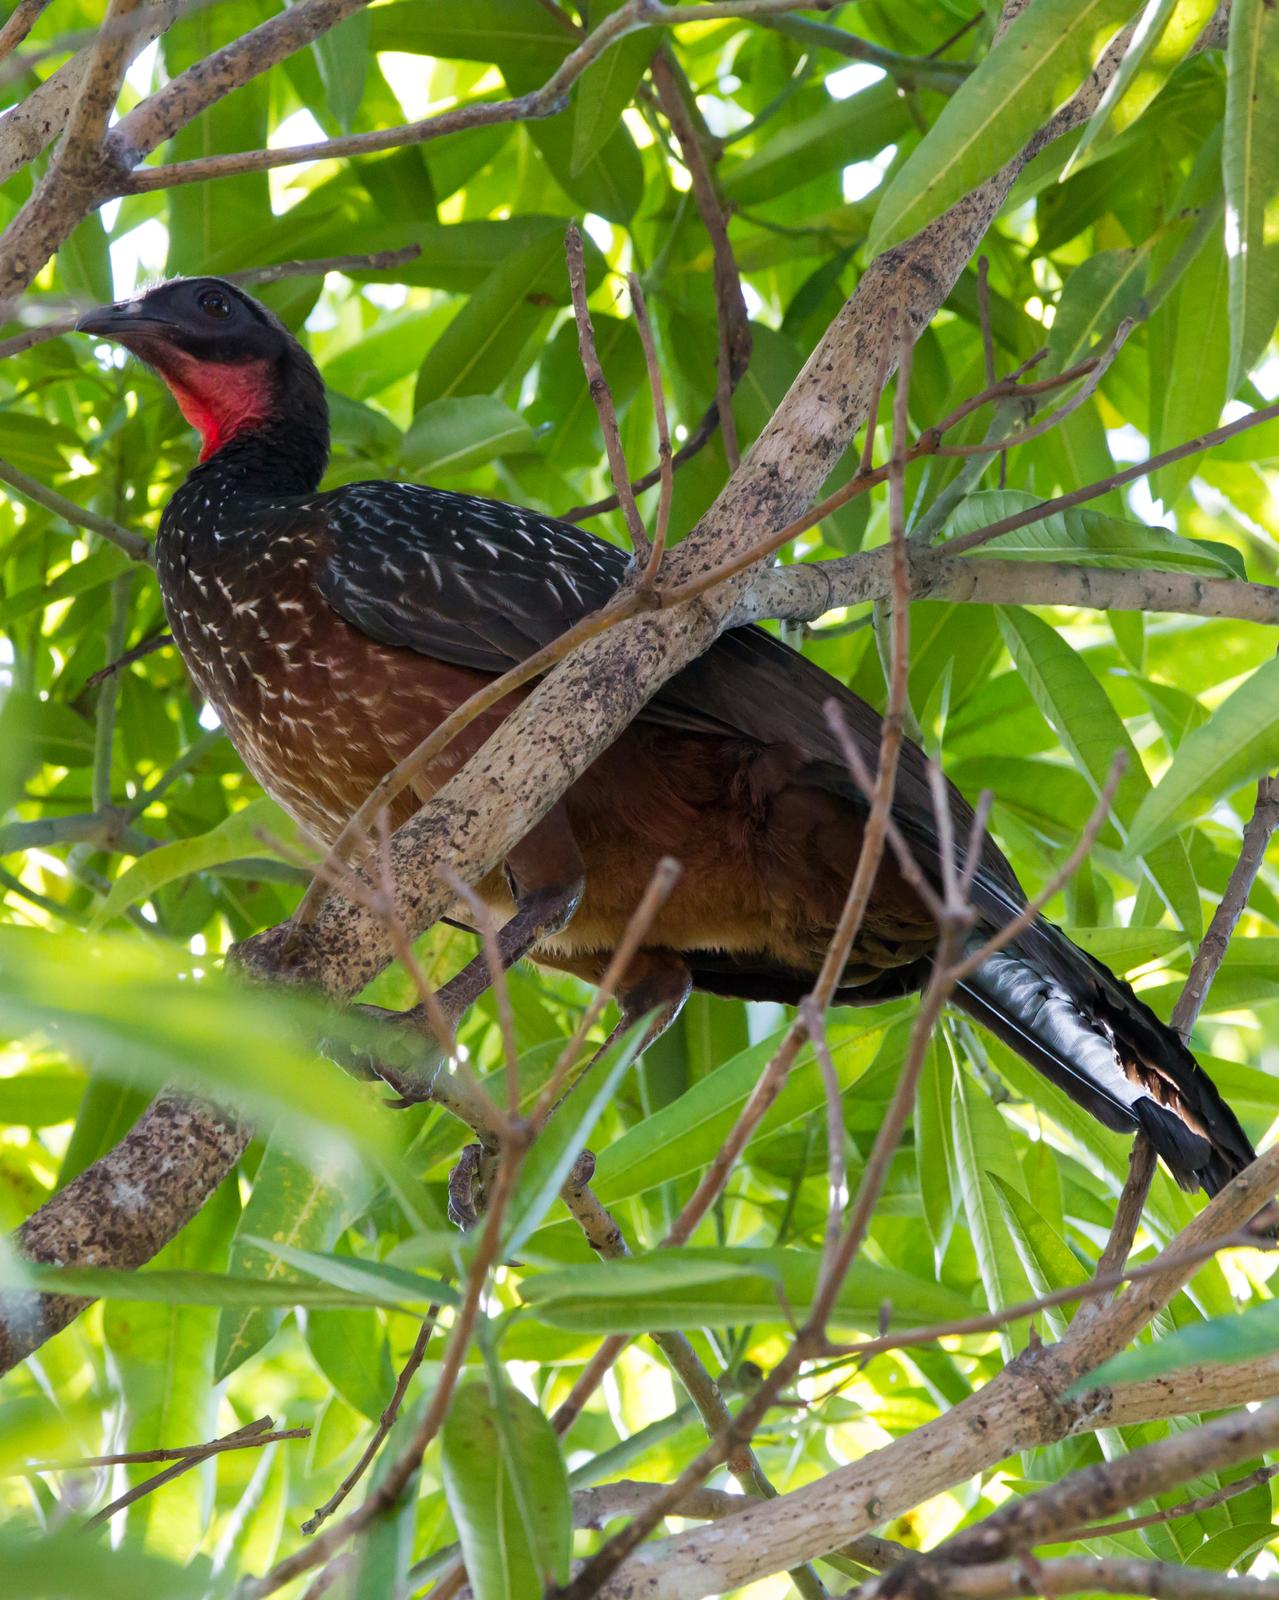 Chestnut-bellied Guan Photo by Kevin Berkoff